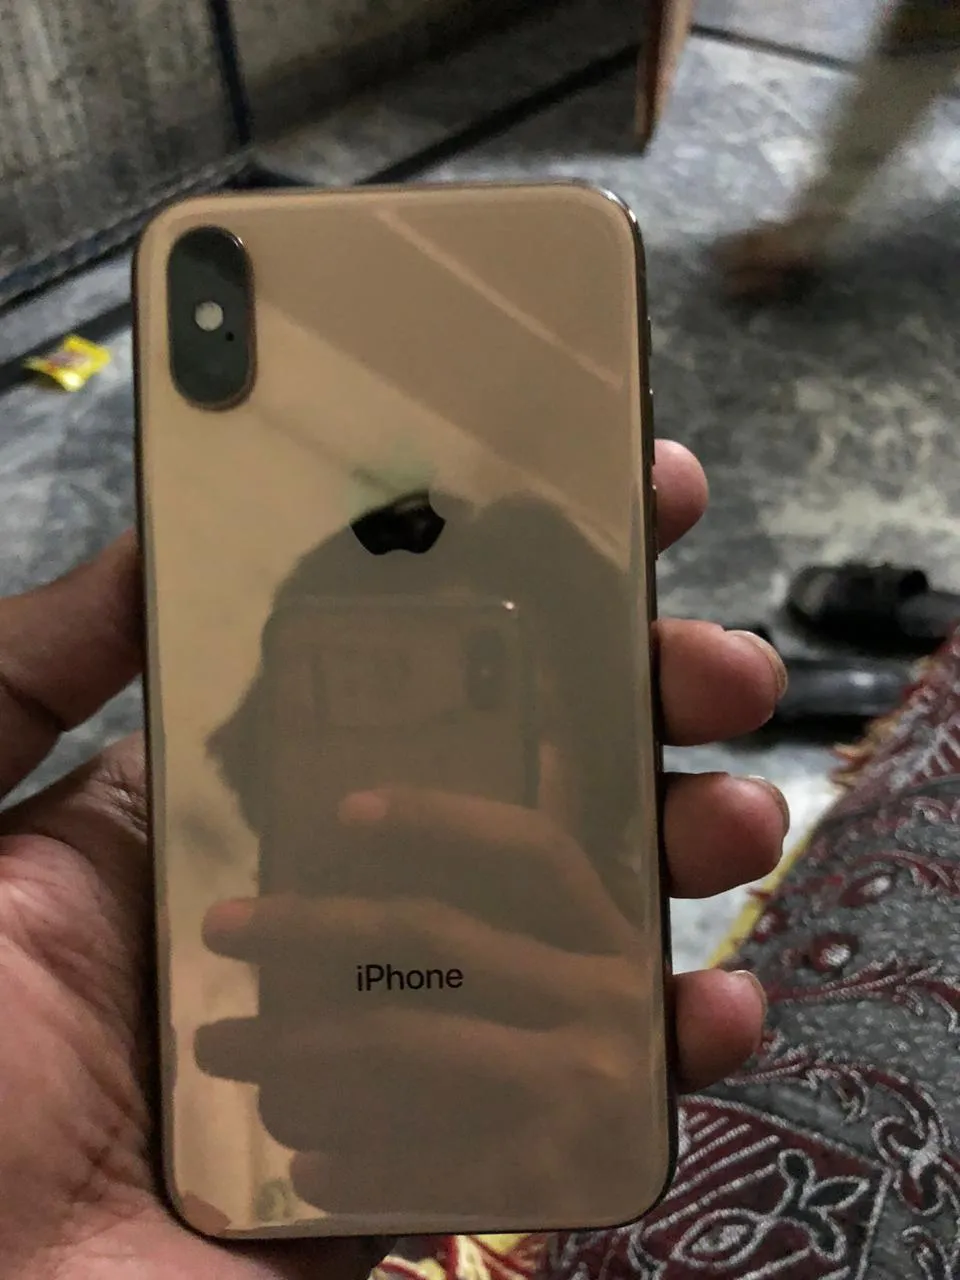 IPhone XS 64gb gold for sale at attractive price - Used Mobile